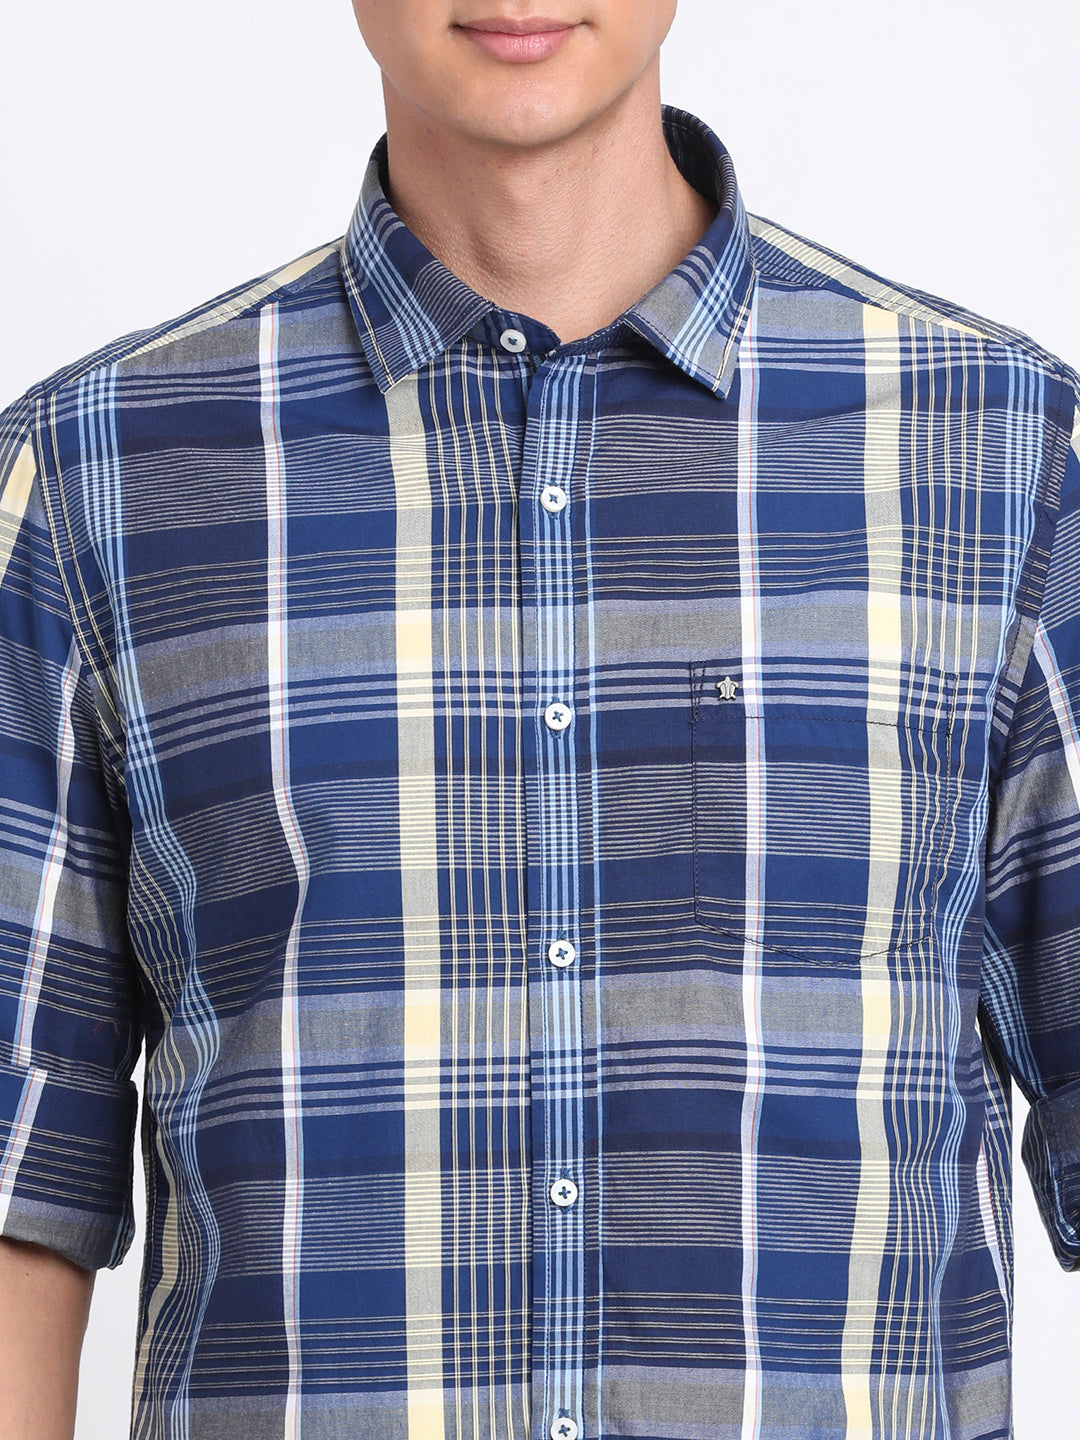 100% Cotton Blue Checkered Slim Fit Full Sleeve Casual Shirt